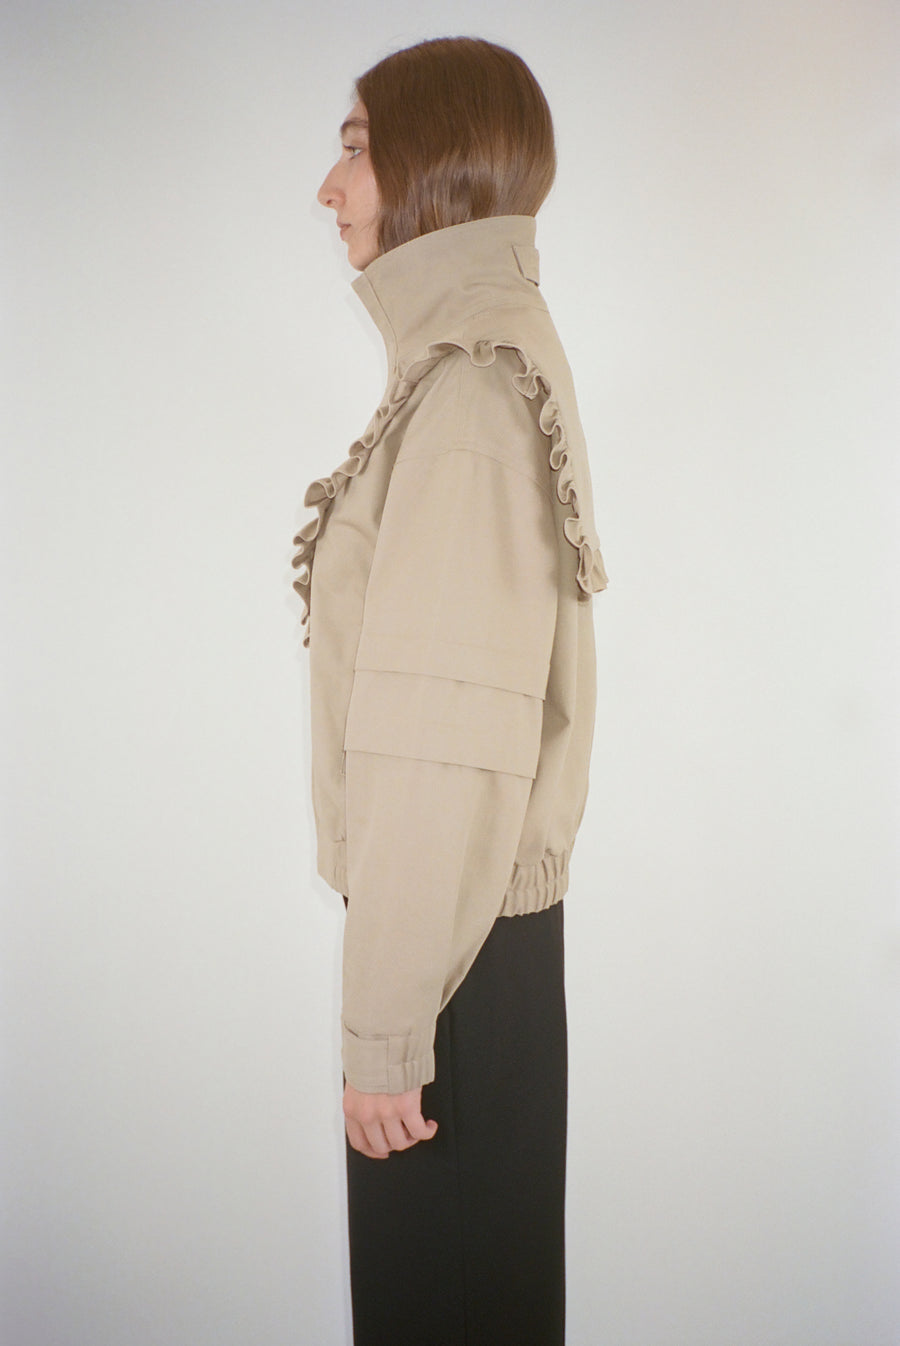 Oversized jacket in taupe with ruffle detail on model